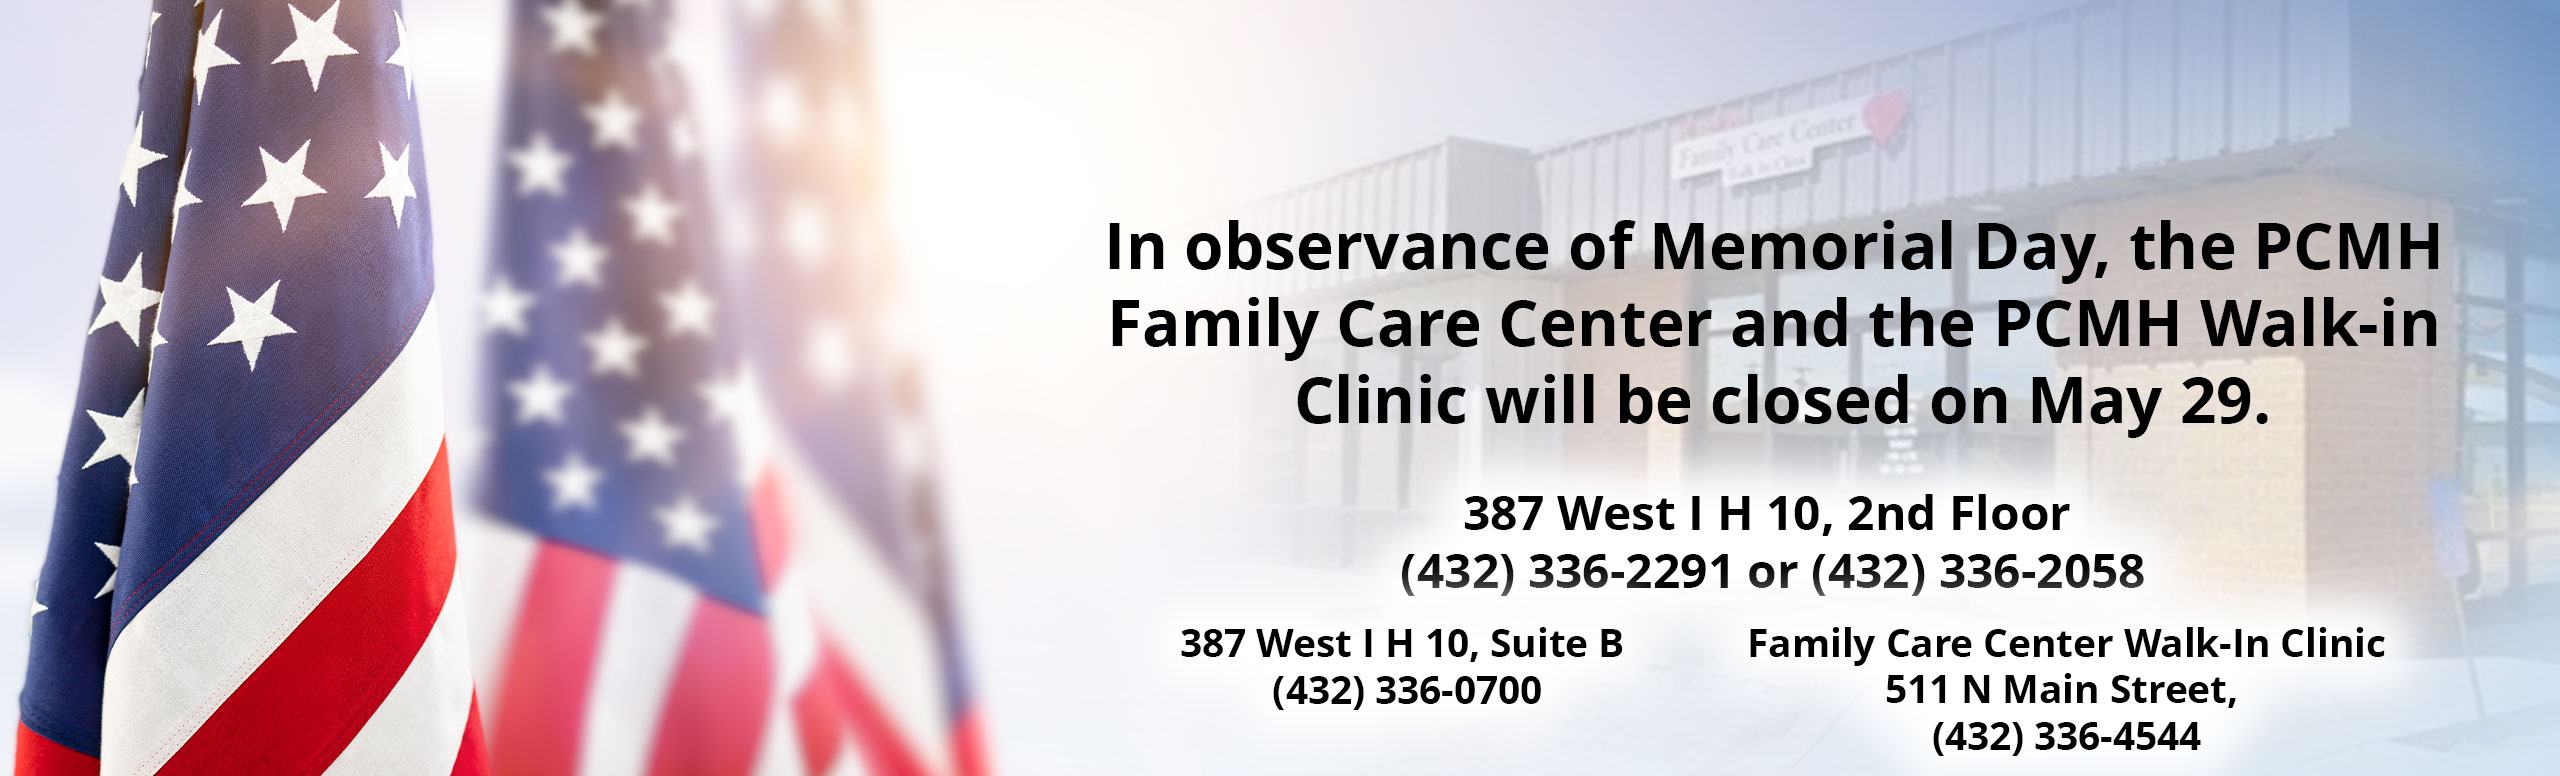 In observance of Memorial Day, the PCMH Family Care Center and the PCMH Walk-In Clinic will be closed on May 29. 

387 West I H 10, 2nd Floor
(432) 336-2291 or (432) 336-2058